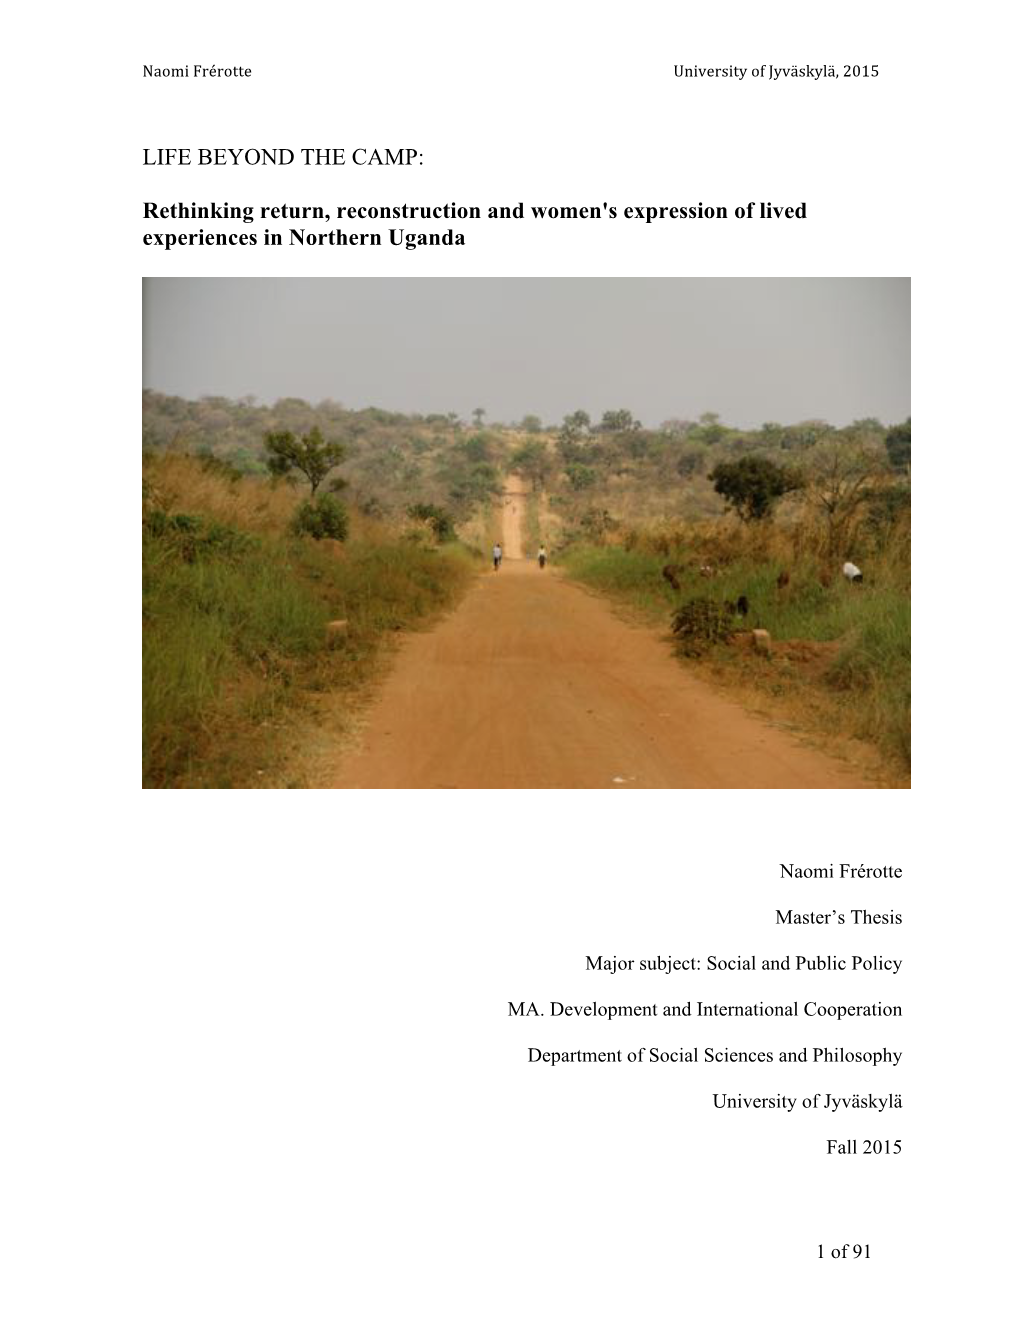 Life Beyond the Camp: Rethinking Return, Reconstruction and Women's Expression of Lived Experiences in Northern Uganda